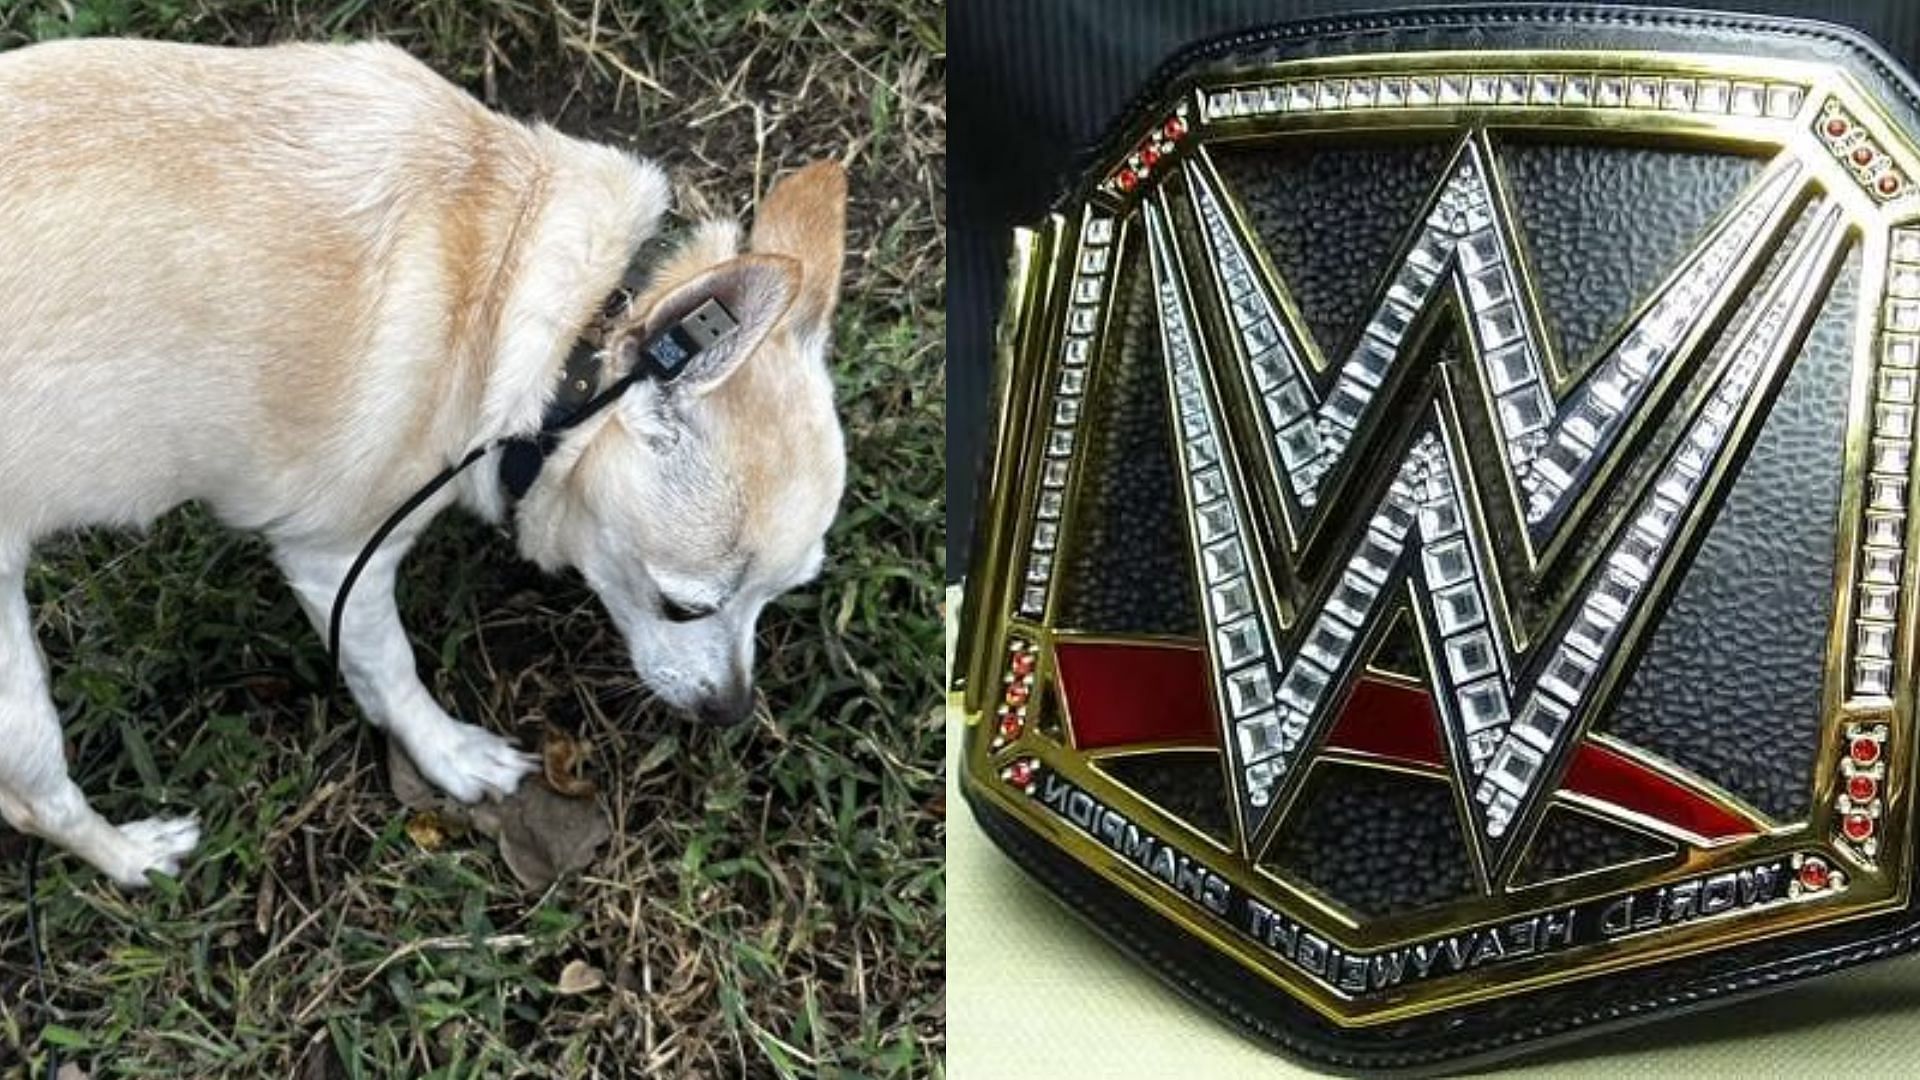 The picture of the dog tied with a USB cable was shared by an AEW personality